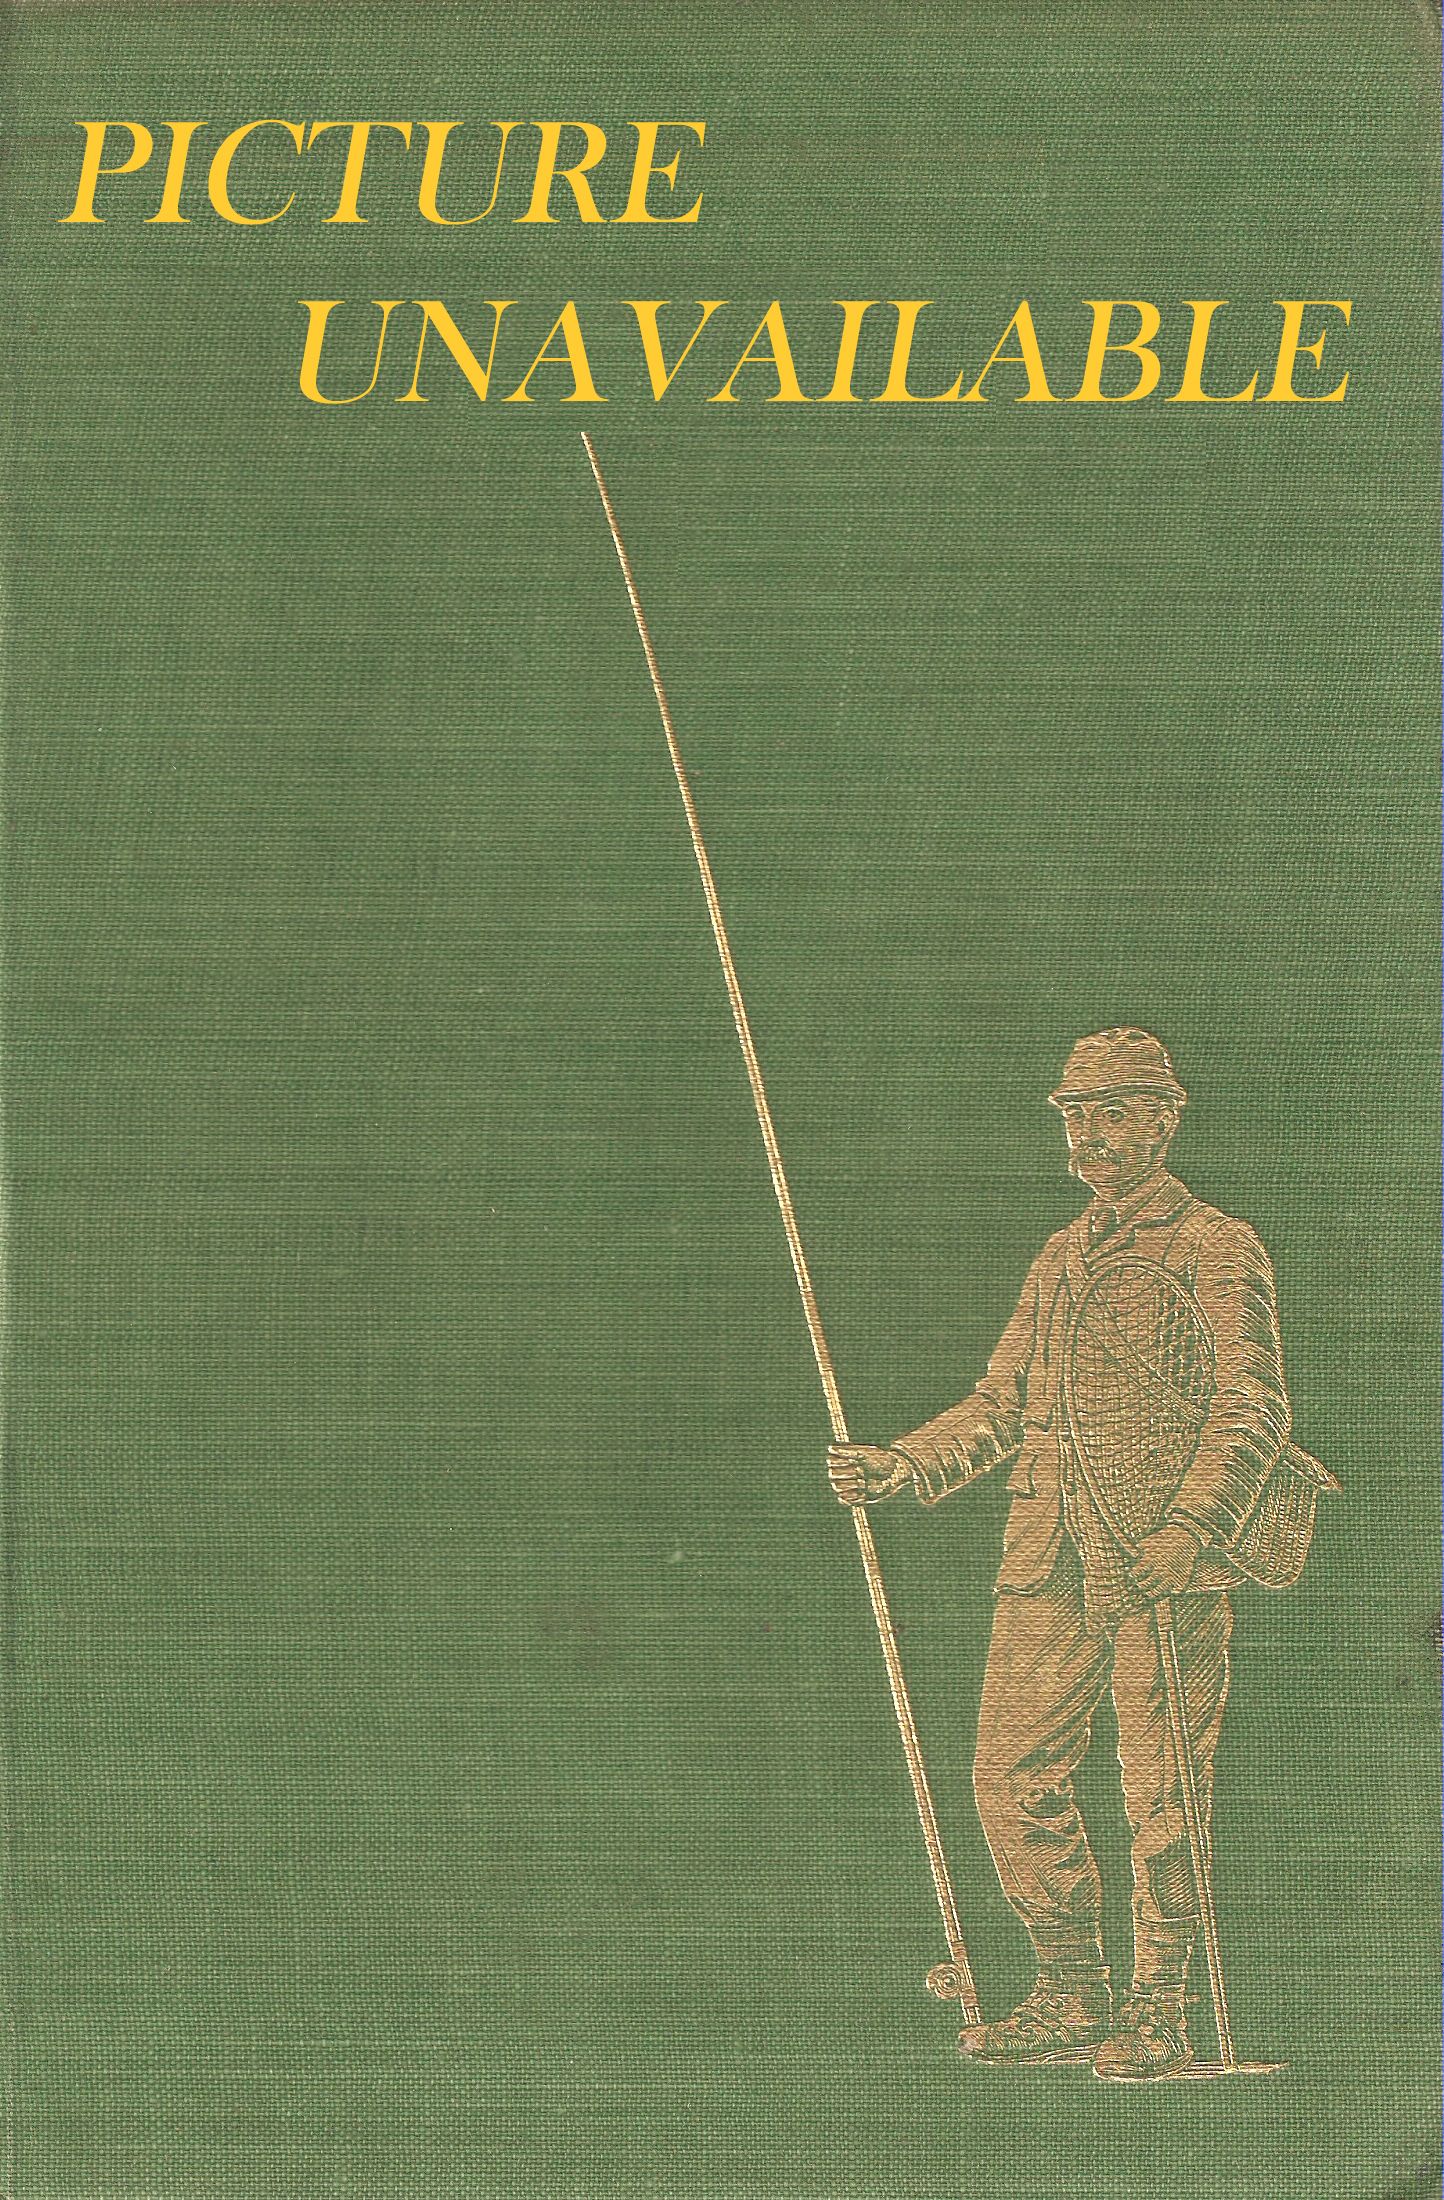 THE PRACTICE OF ANGLING, PARTICULARLY AS REGARDS IRELAND. By O'Gorman. In  two volumes. Introduction by Kevin McKenna and Patrick Gageby.